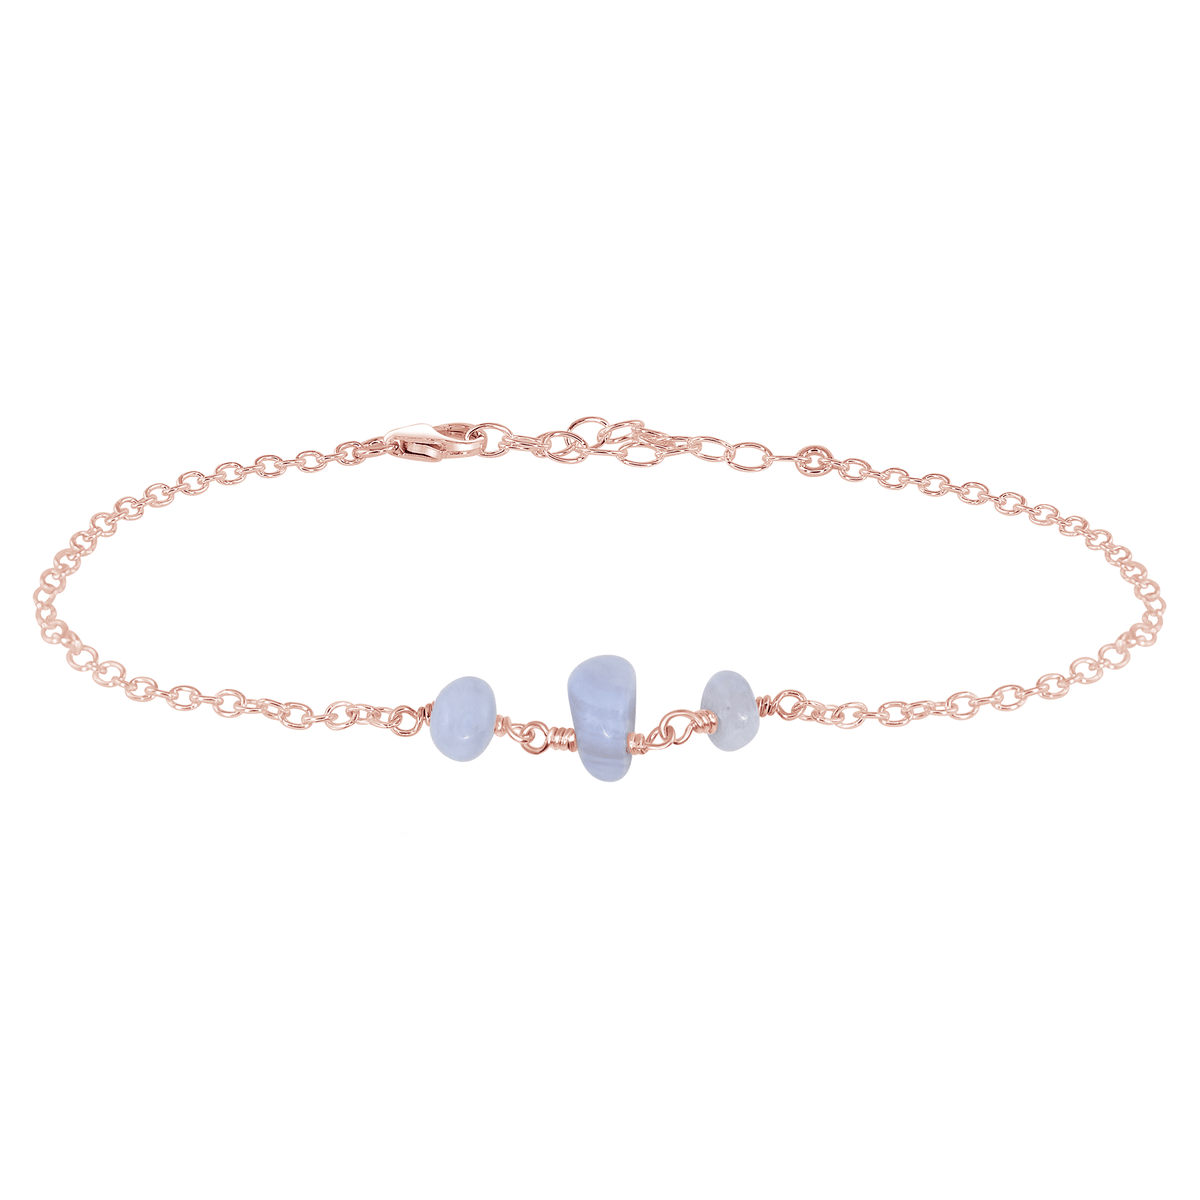 Beaded Chain Anklet - Blue Lace Agate - 14K Rose Gold Fill - Luna Tide Handmade Jewellery